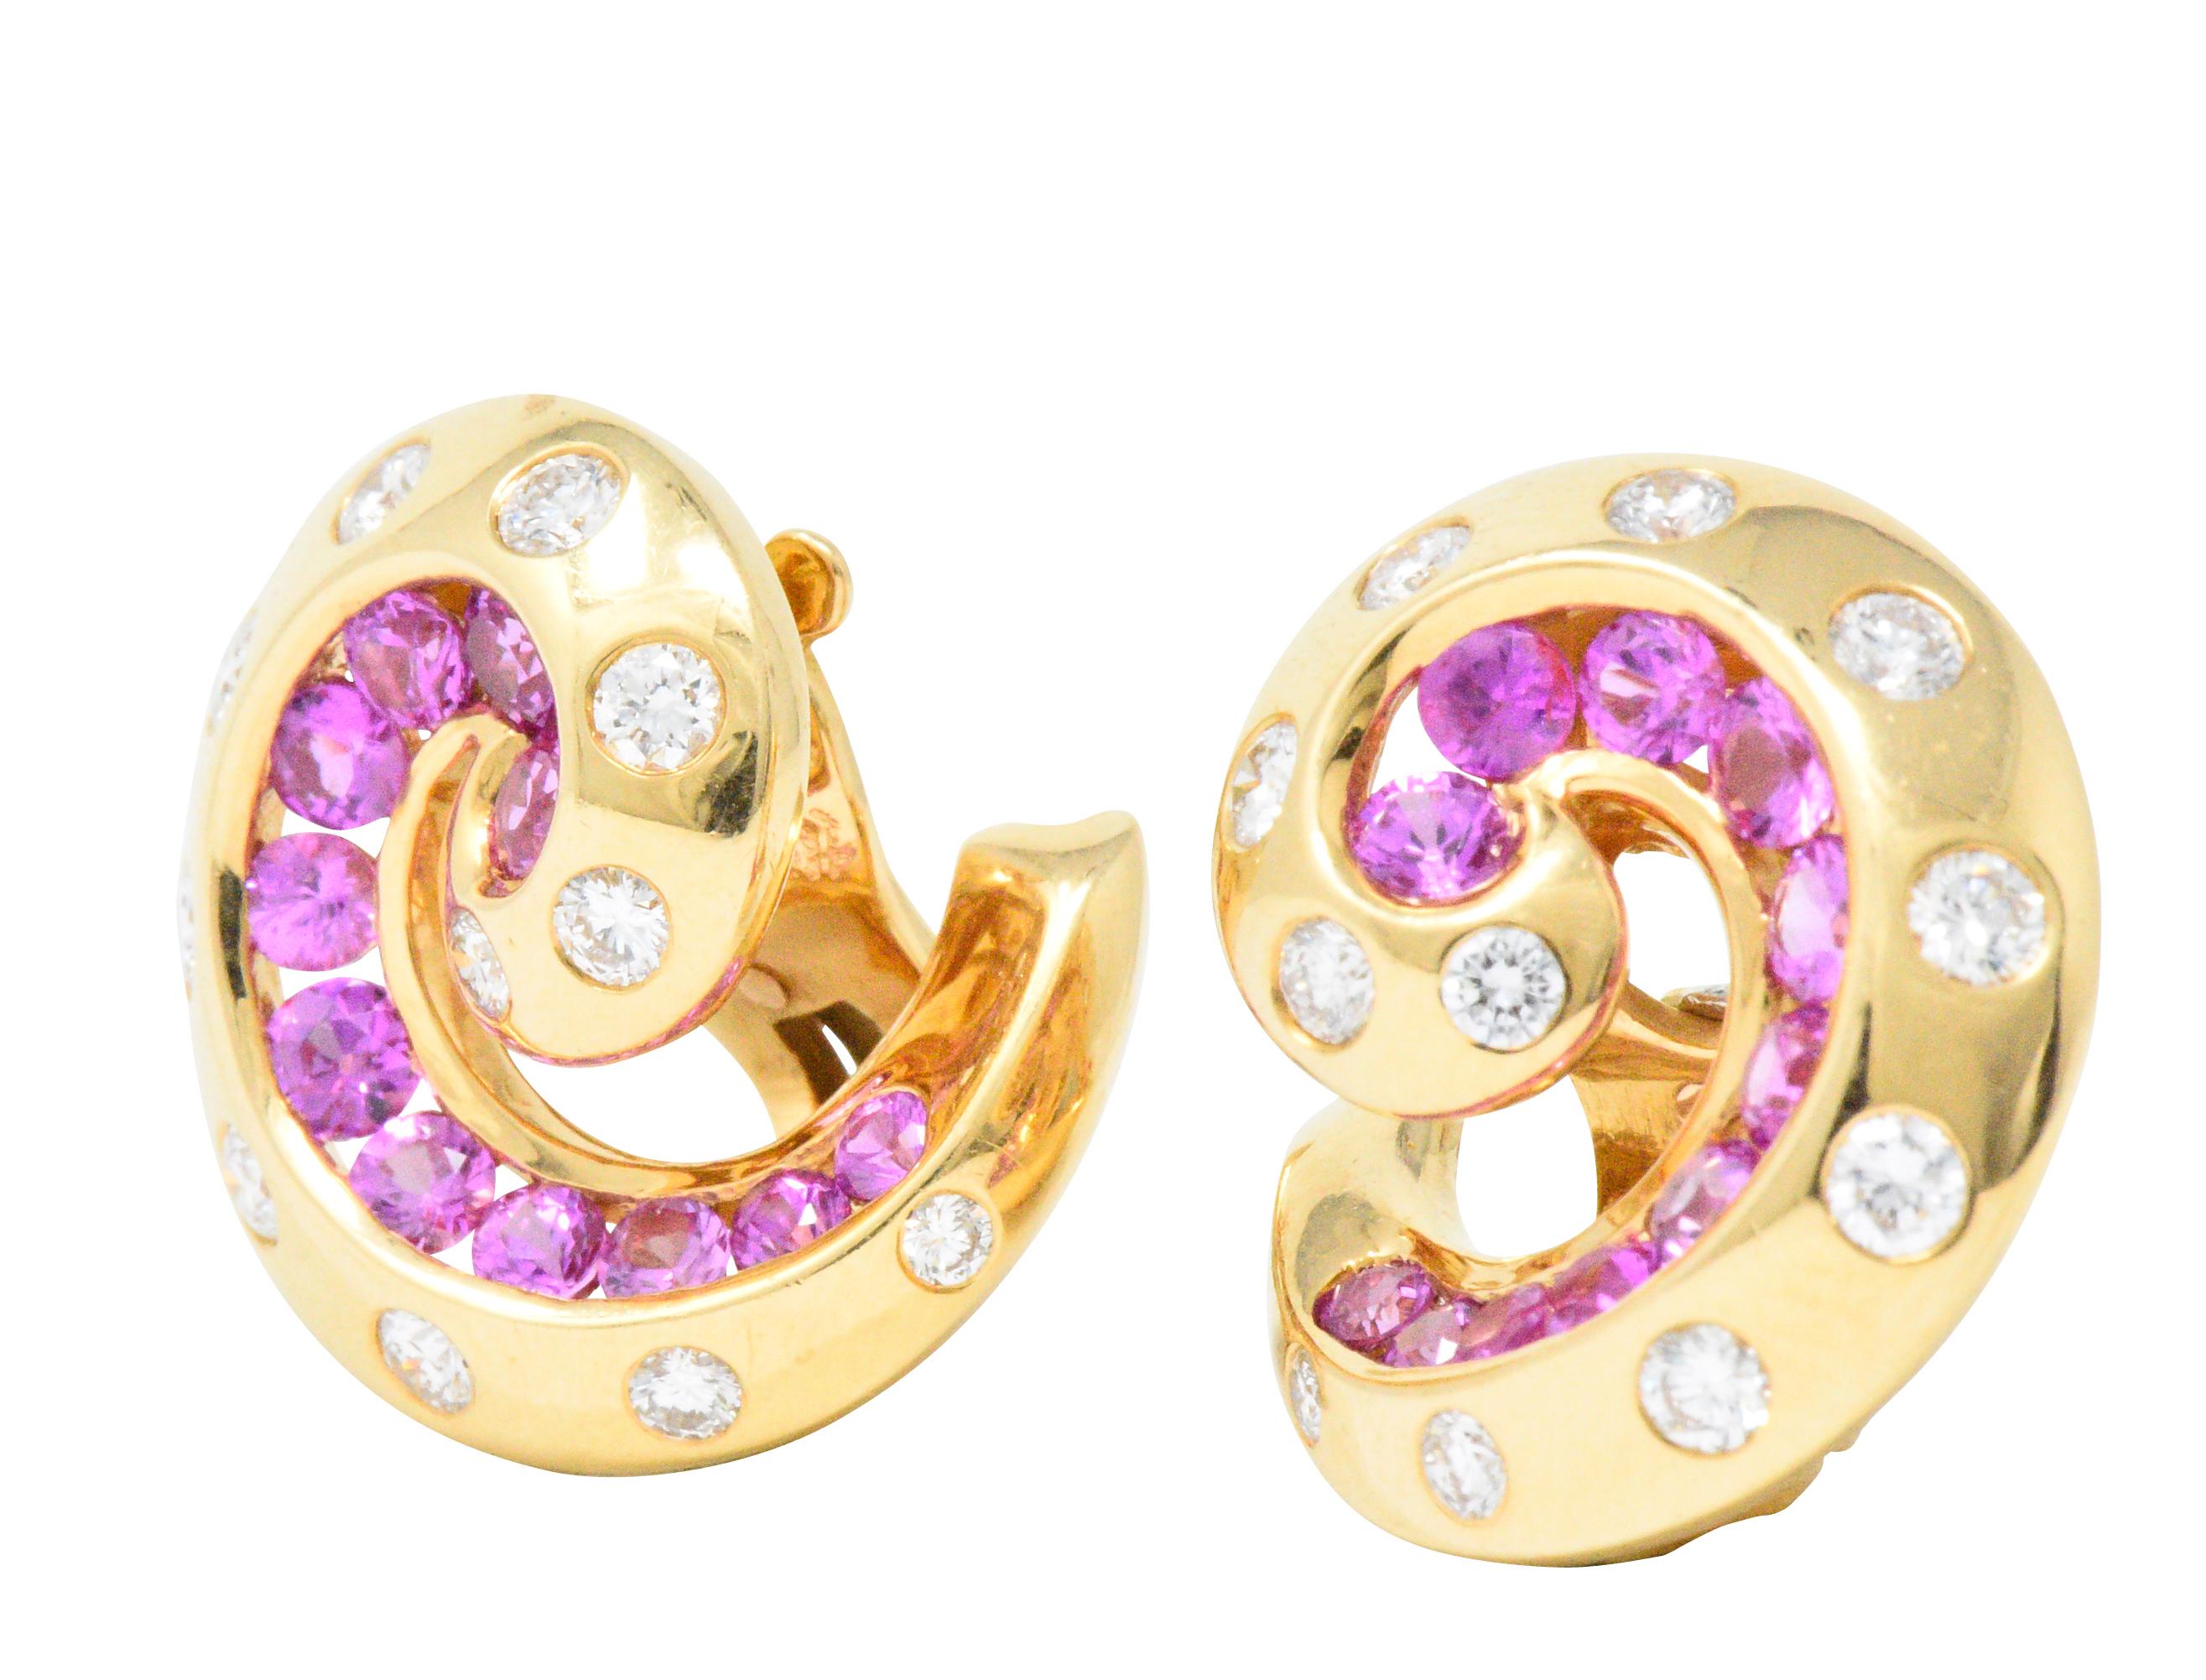 Designed as polished gold swirls each centering eleven channel set, graduated, round cut pink sapphires, twenty-two sapphires total weighing approximately 1.95 carats total, bright pink color and very well matched

Each with eleven bezel or flush